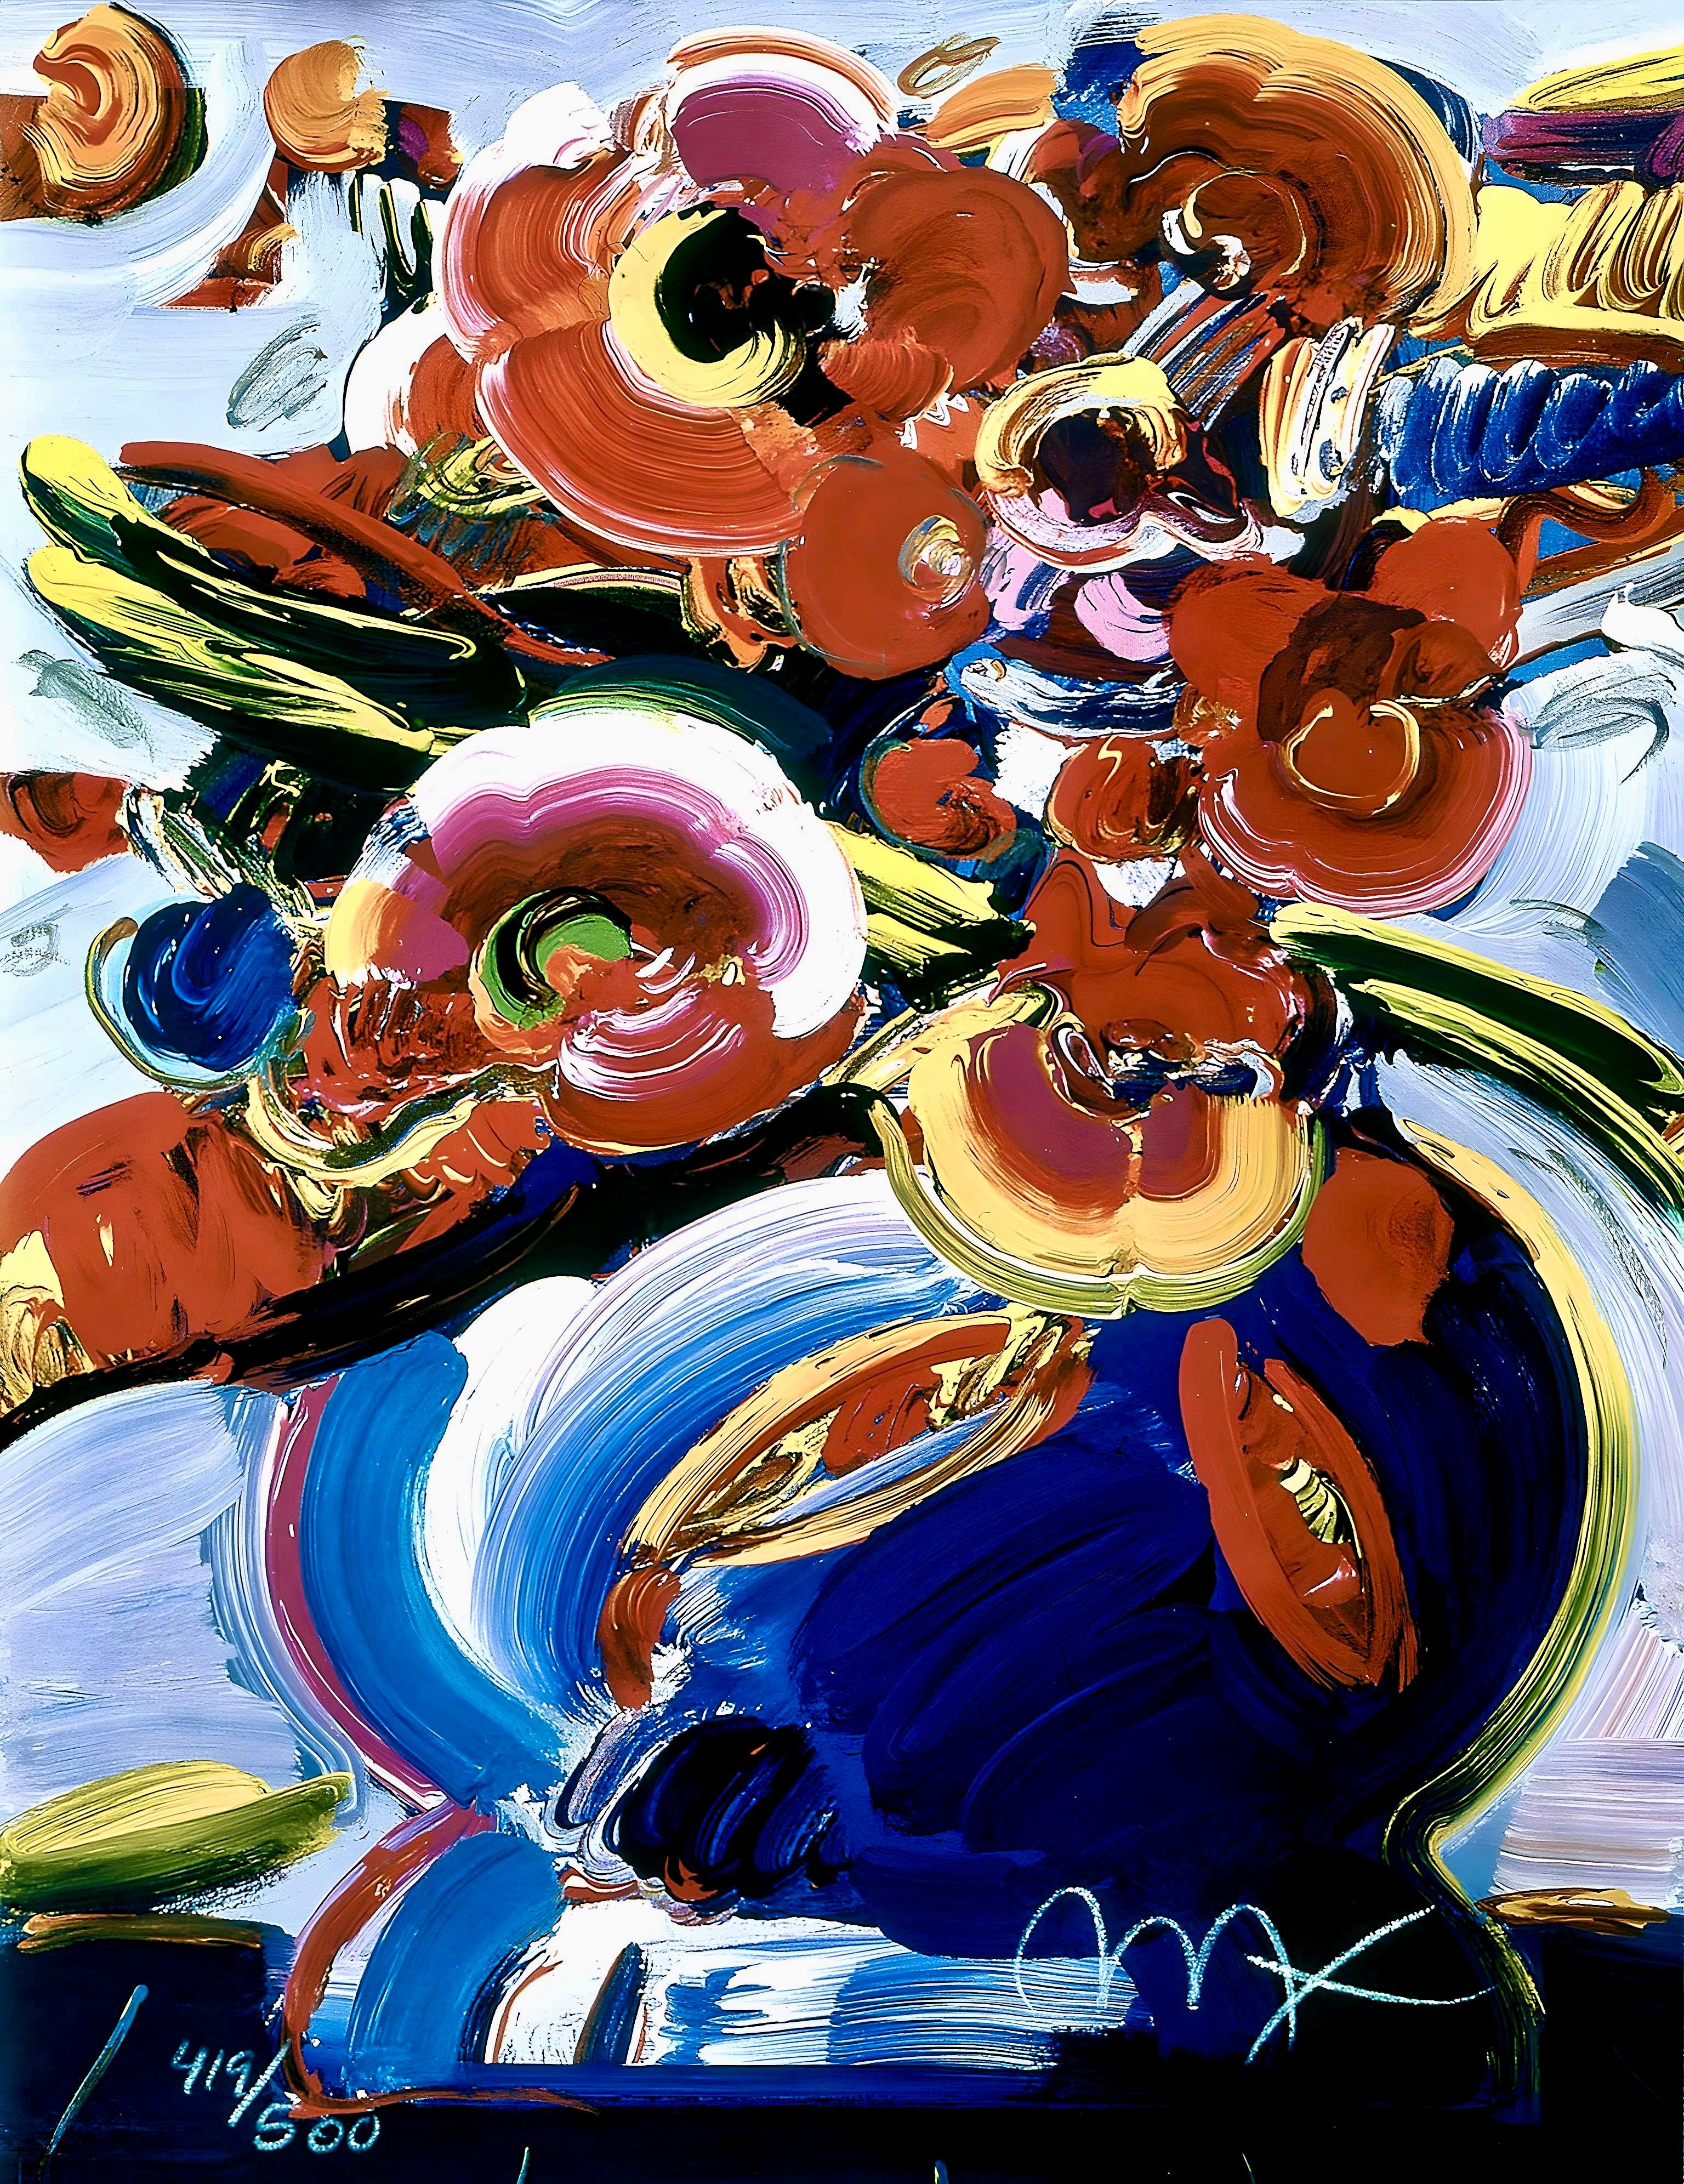 Artist: Peter Max (1937)
Title: Flowers In Blue Vase III
Year: 2000
Edition: 419/500, plus proofs
Medium: Lithograph on archival paper
Size: 12 x 9 inches
Condition: Excellent
Inscription: Signed and numbered by the artist.
Notes: Published by Via